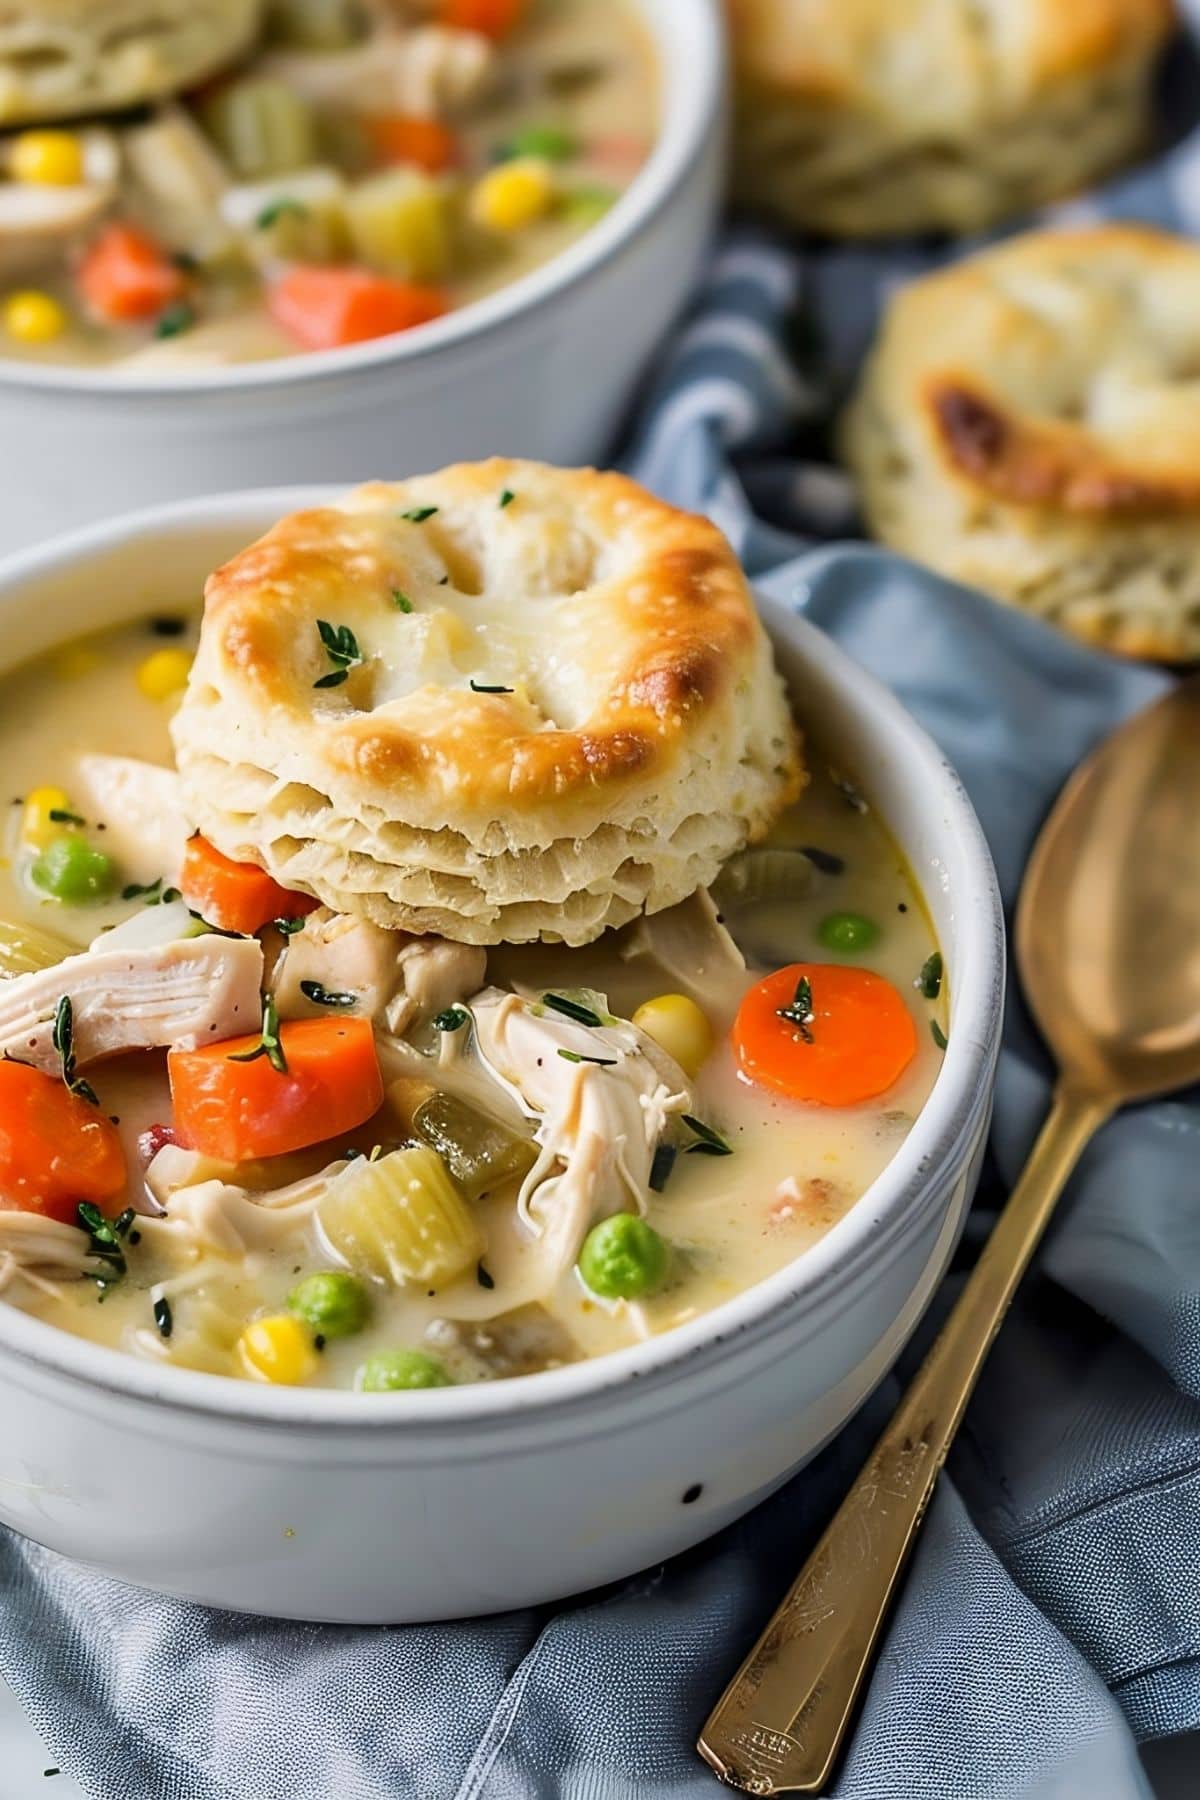 Bowls of Chicken Pot Pie Soup with Chicken, Carrots, Celery, Peas, Onions, and Corn, Served with Biscuits, Spoon to the Side